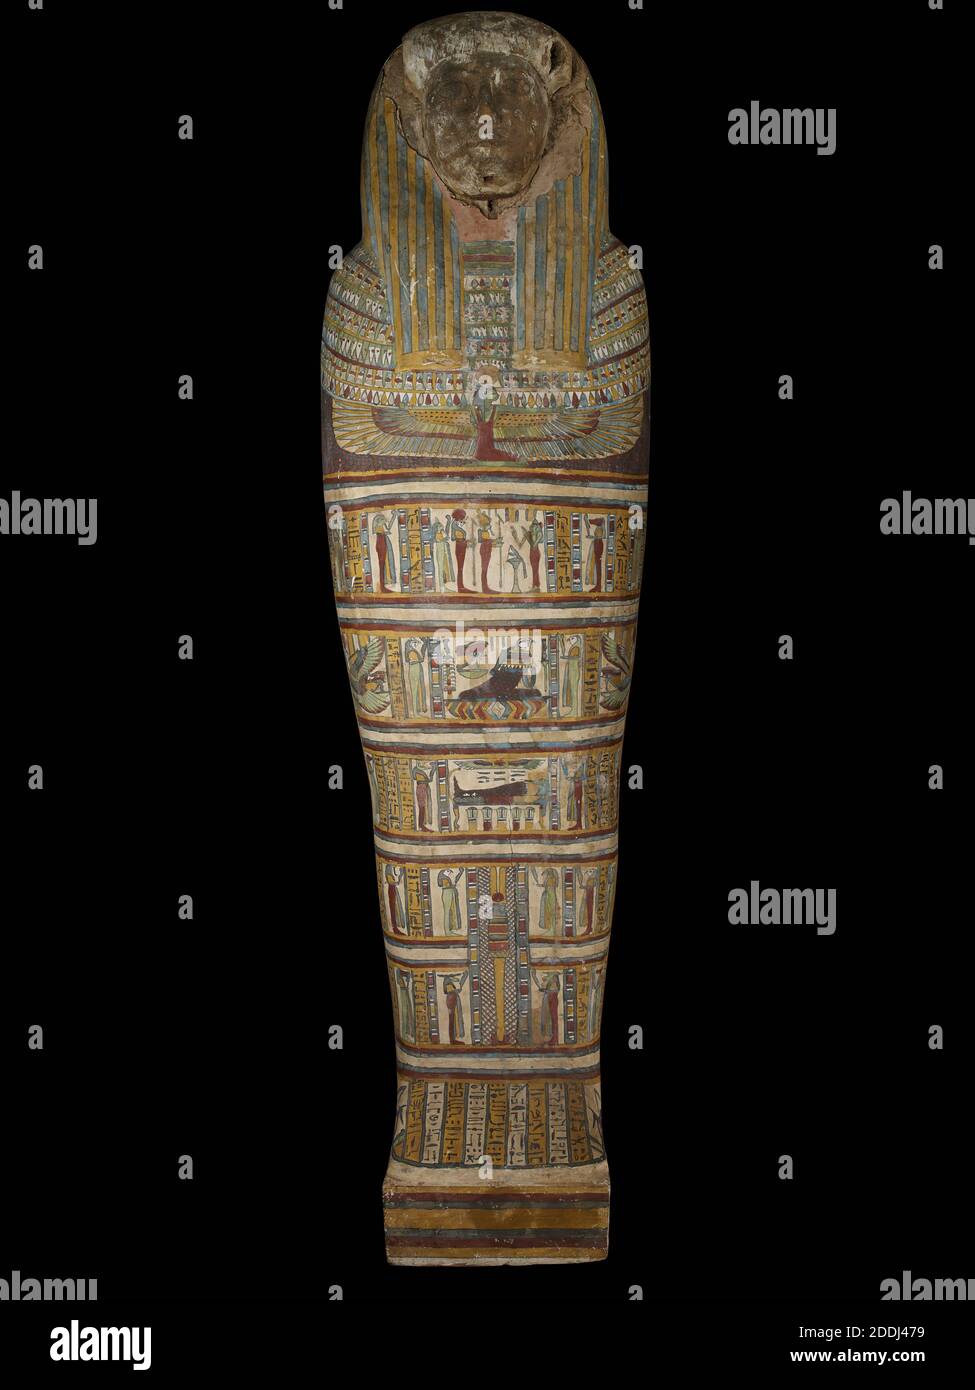 Painted plaster on wood coffin belonging to Lady Tadi-en-hent awy daughter of Nes-Khonsu, 650-500 BC, Ancient Egypt, Sarcophagus, Death, Coffin, Mummy, hieroglyphs Stock Photo